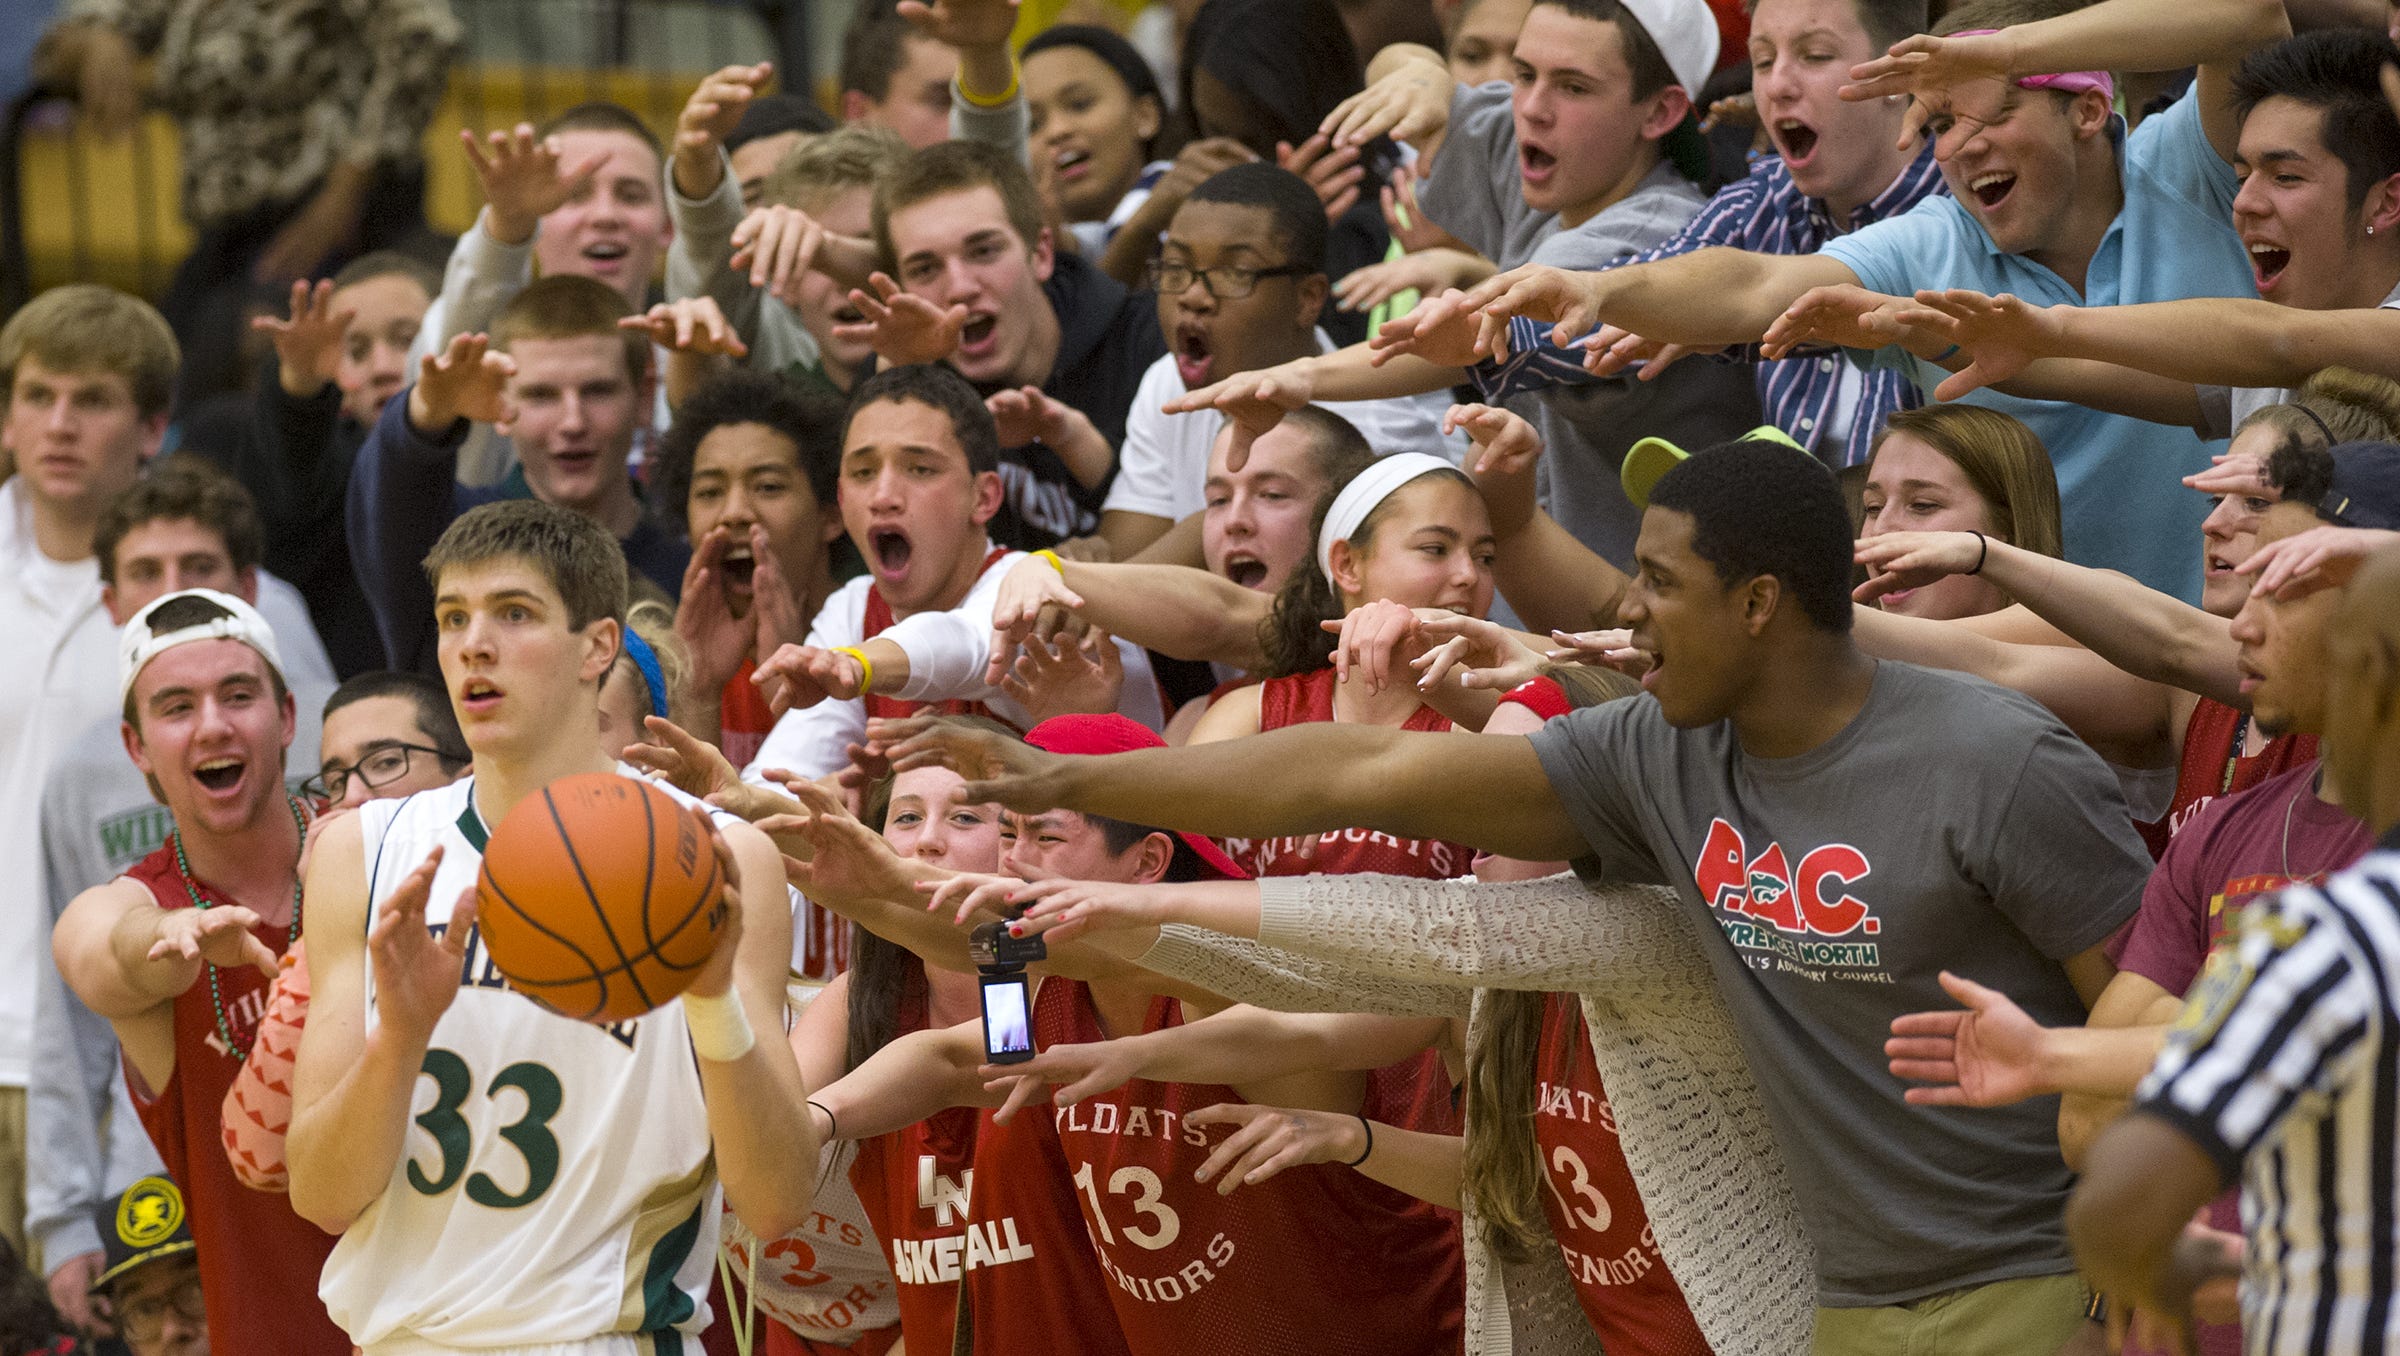 Indiana high school basketball Excited about sectionals? You'll love